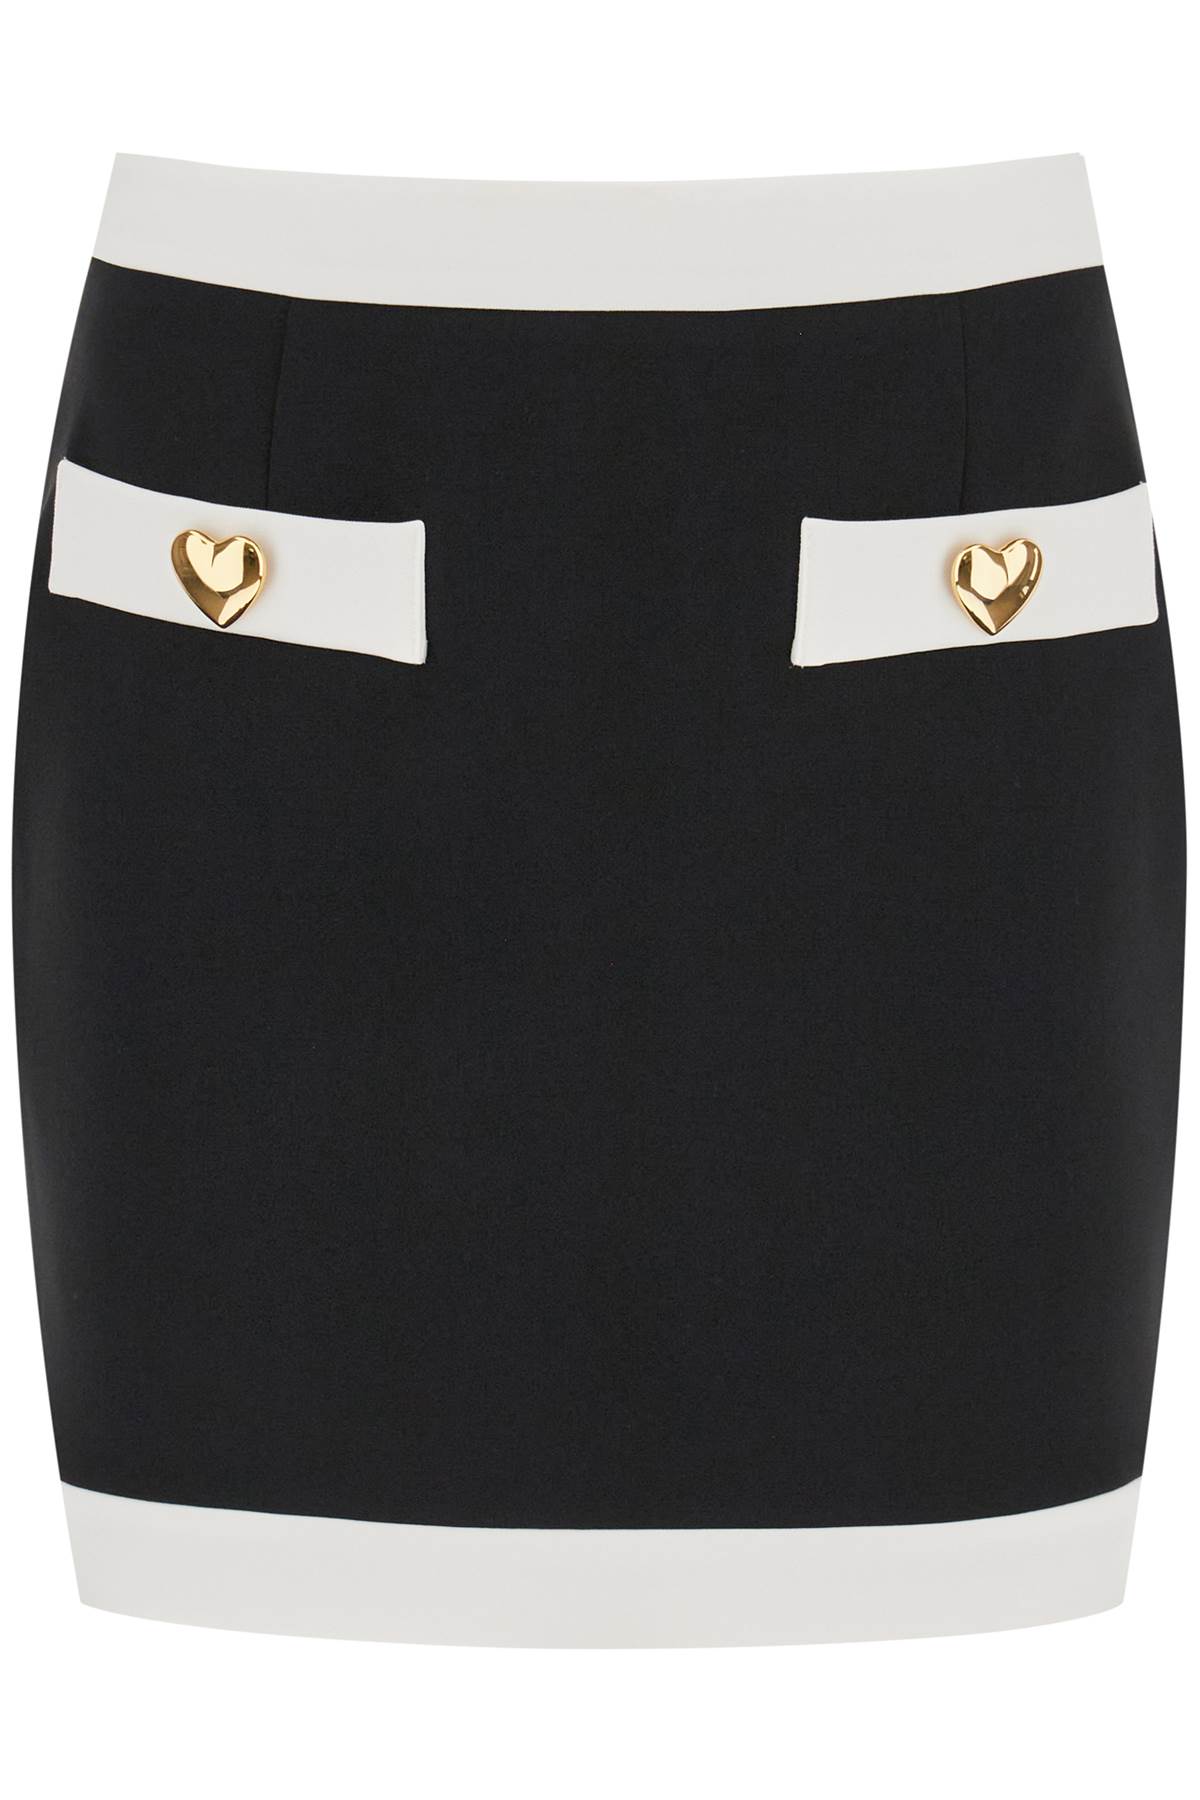 MOSCHINO MINI SKIRT WITH HEART-SHAPED BUTTONS